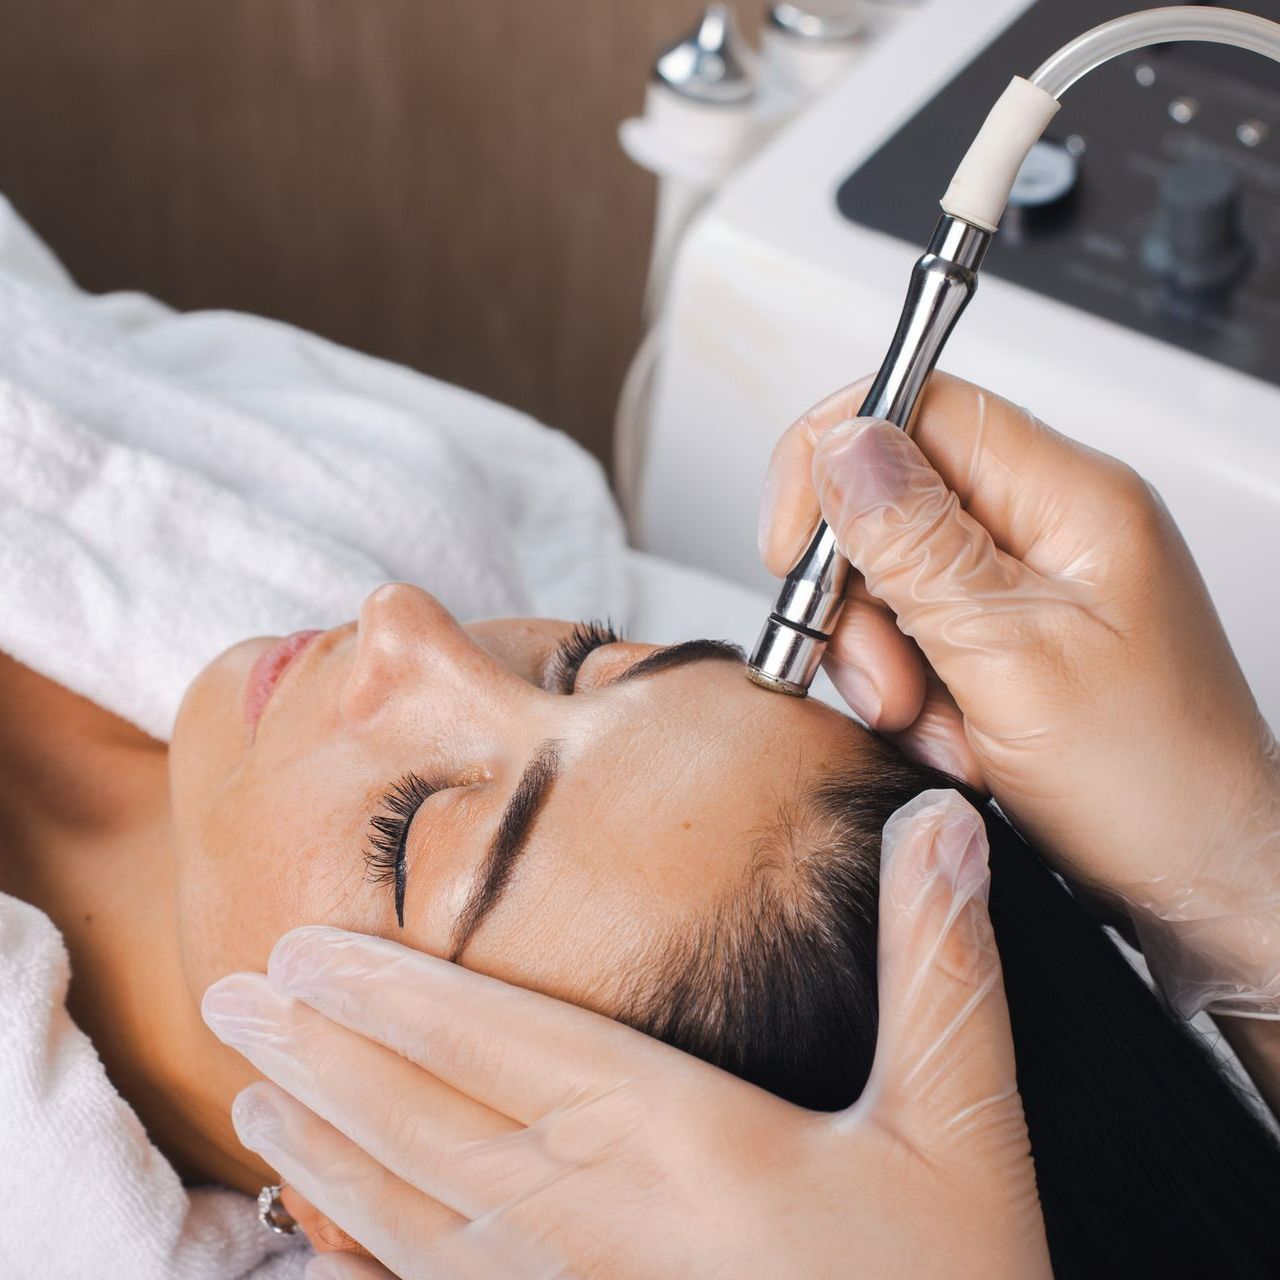 Microdermabrasion Facial - Licensed Aesthetician in the Dallas - Fort Worth area.